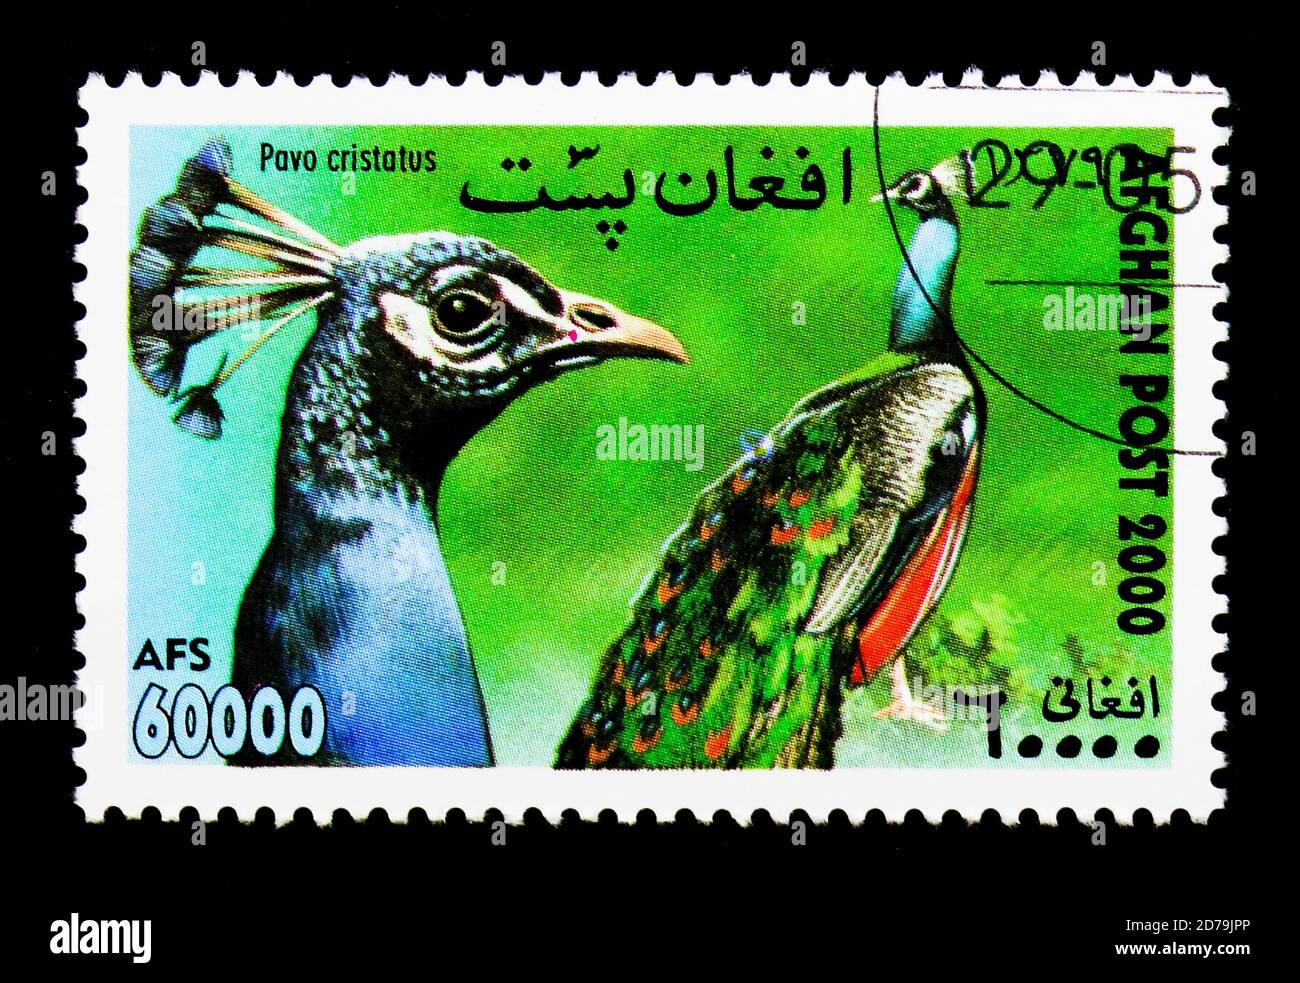 MOSCOW, RUSSIA - DECEMBER 21, 2017: A stamp printed in Afghanistan shows Common Peacock (Pavo cristatus), International Stamp Exhibition WIPA Vienna s Stock Photo